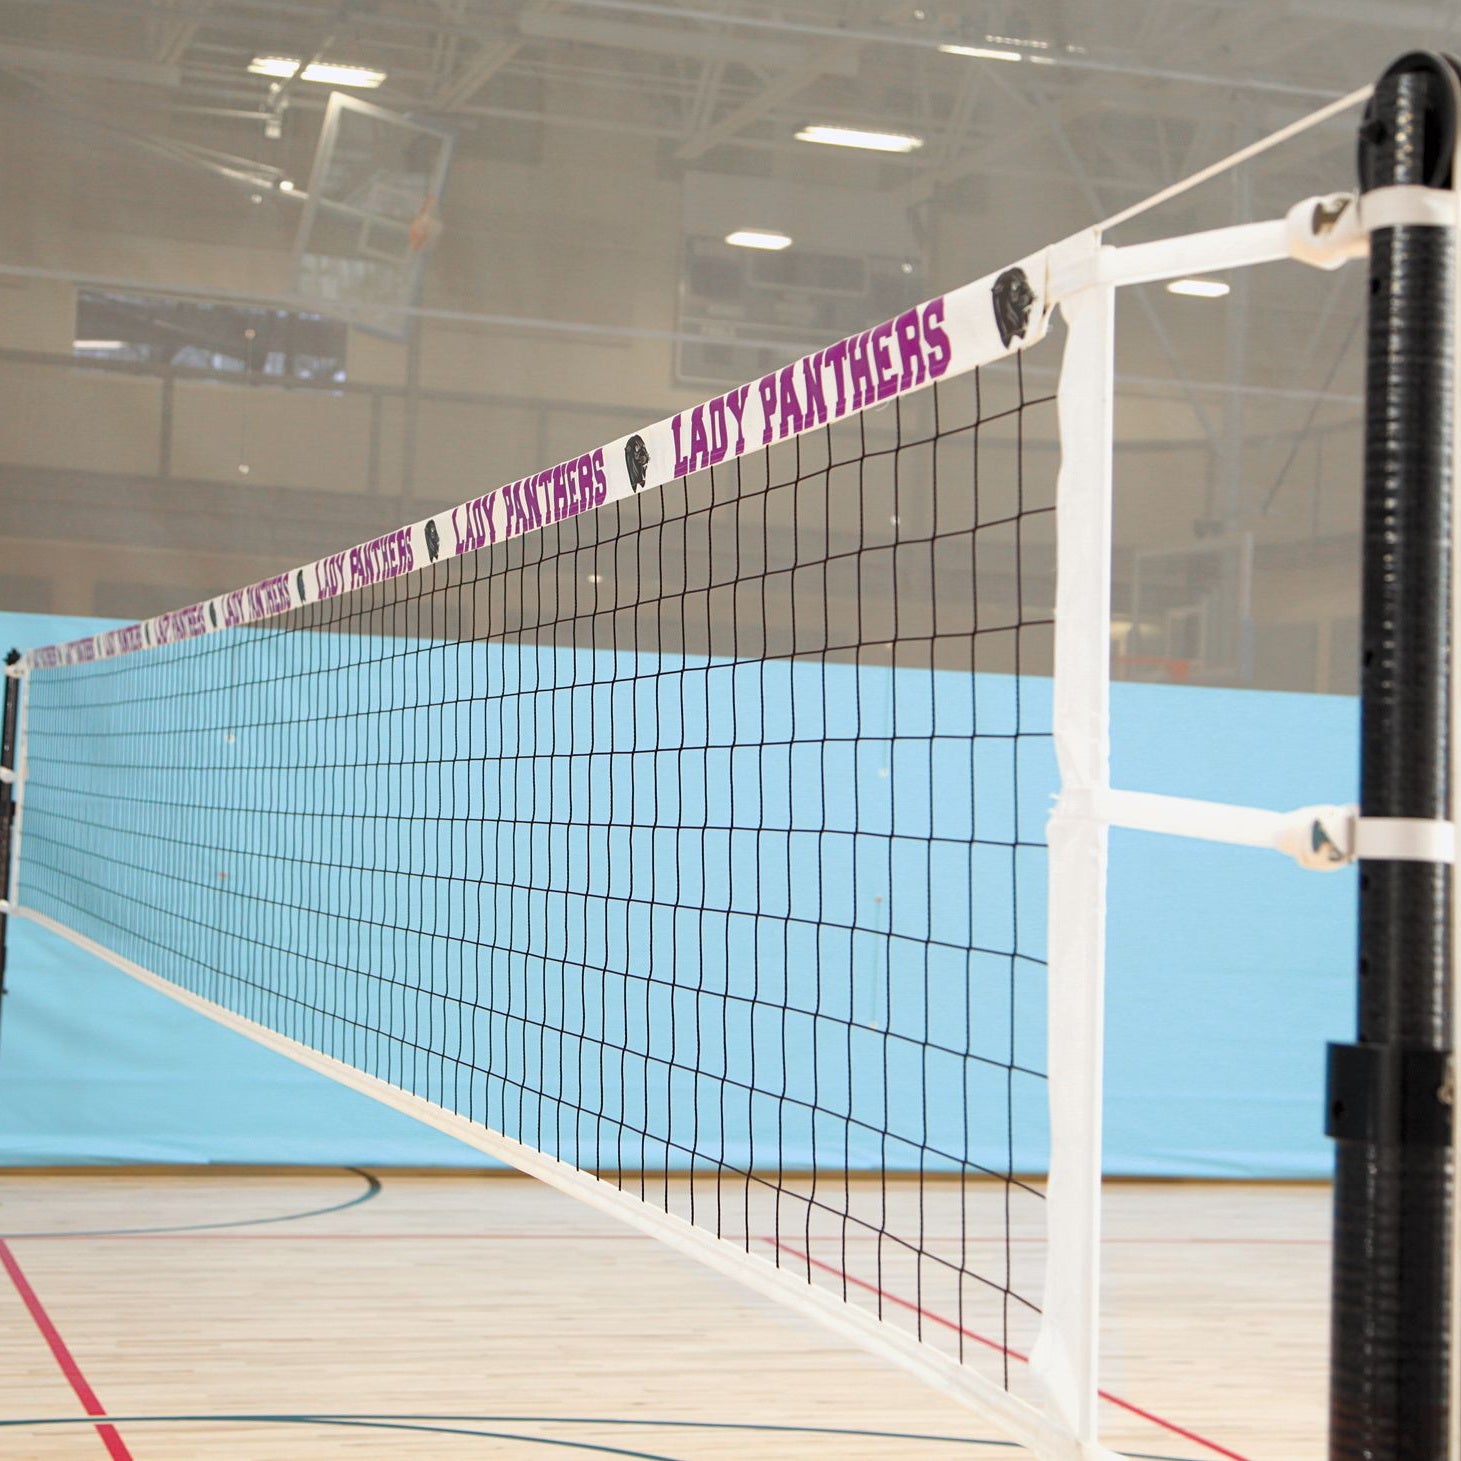 porter volleyball net sleeve with custome graphics